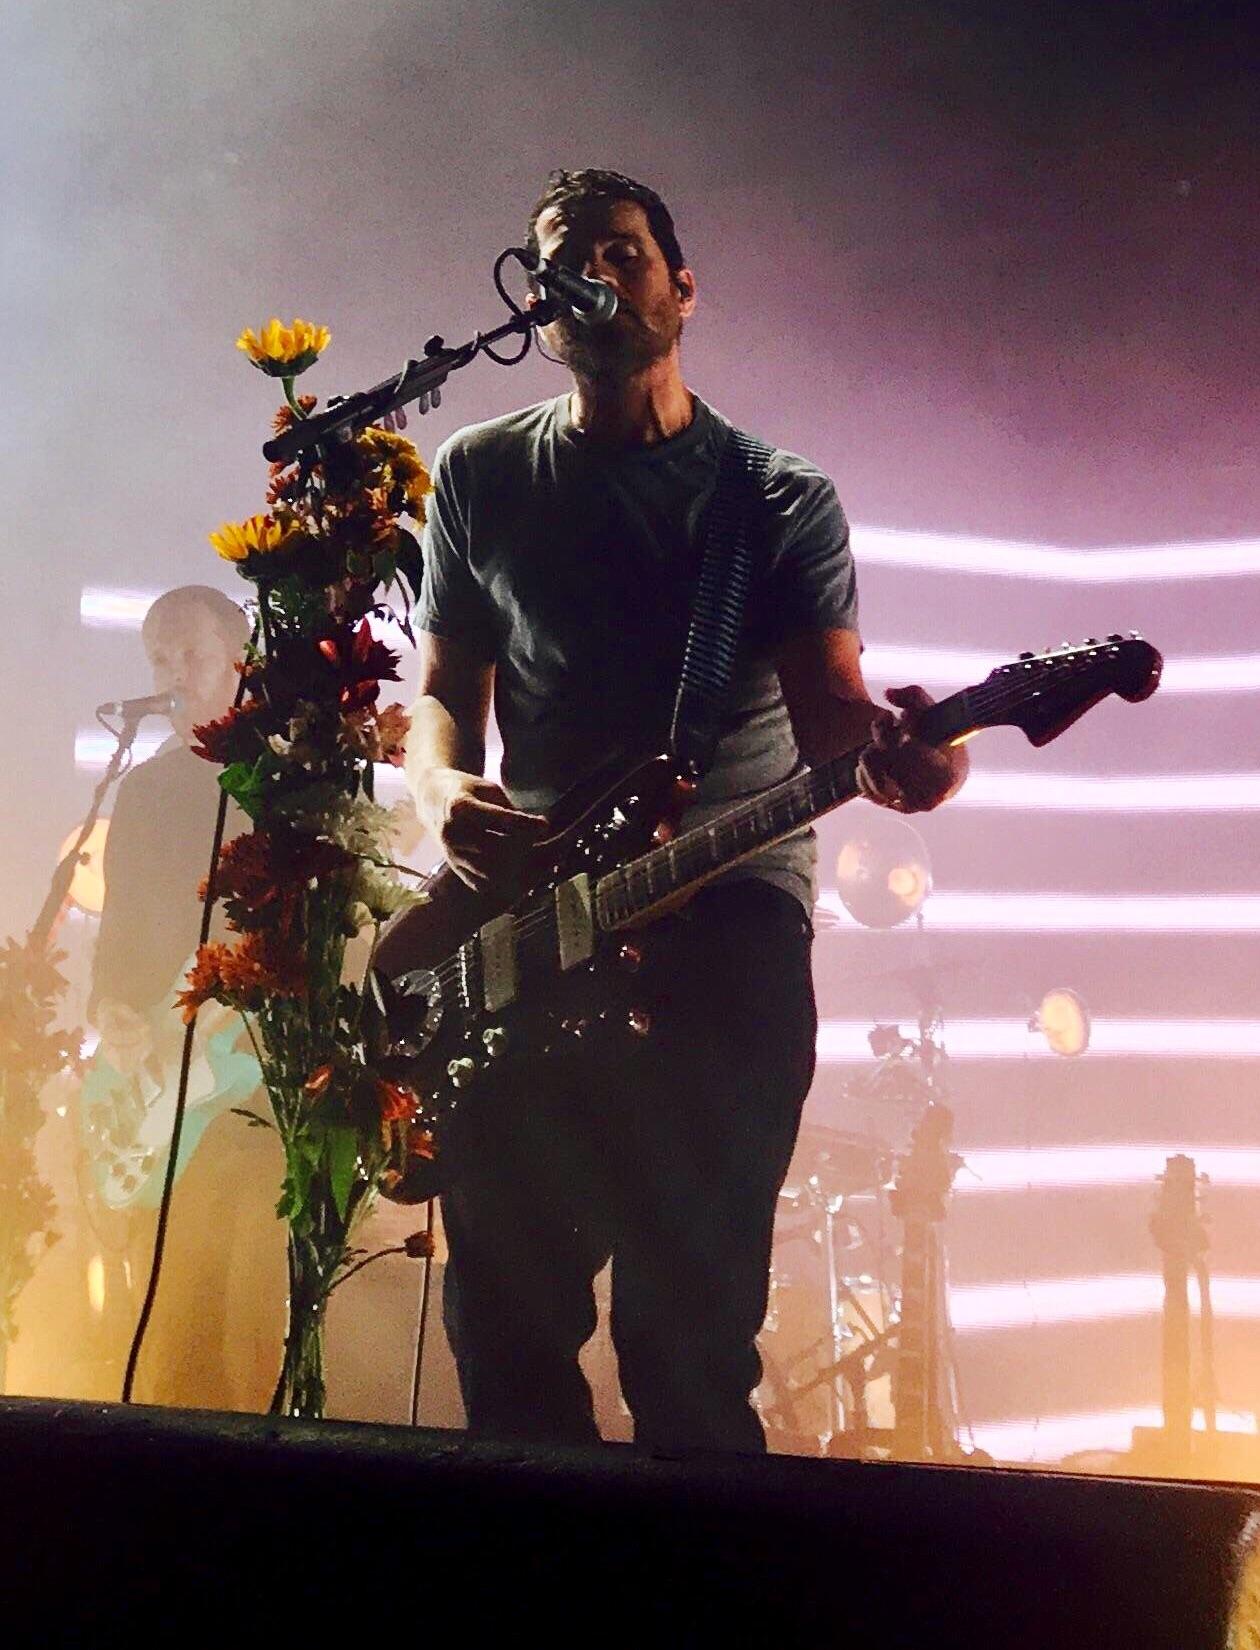 Lanye Guitars Share Photos of Guitar Designed by Jesse Lacey